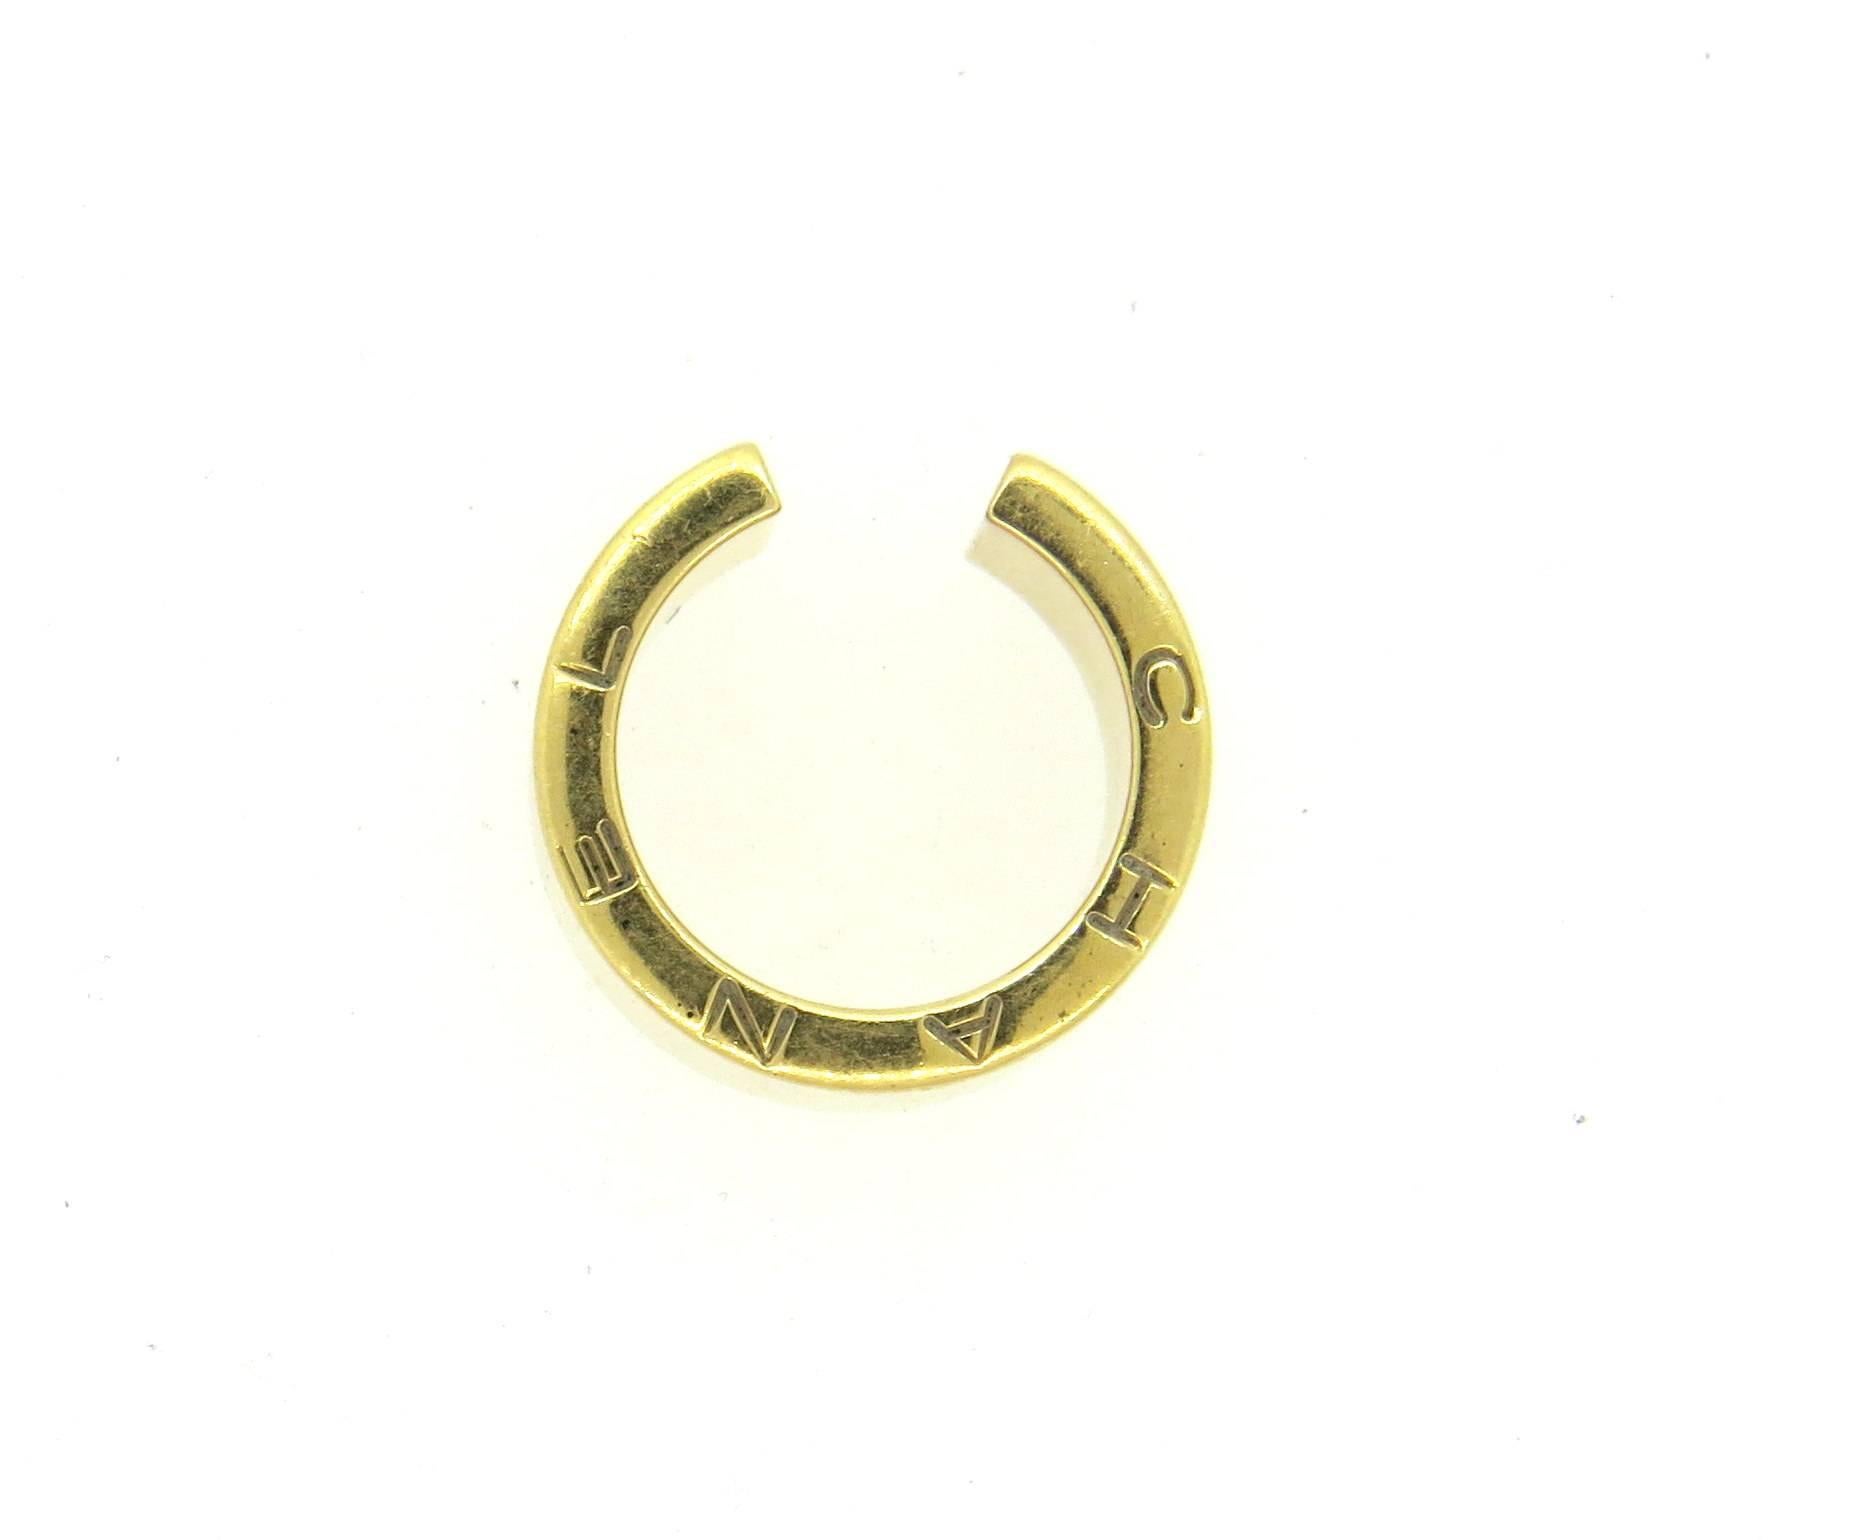 18k yellow gold cuff ring, crafted by Chanel. Ring is a size 4 and is 11mm wide. Marked: Chanel, 750, French gold assay marks, 9G2472. Weight - 20 grams 